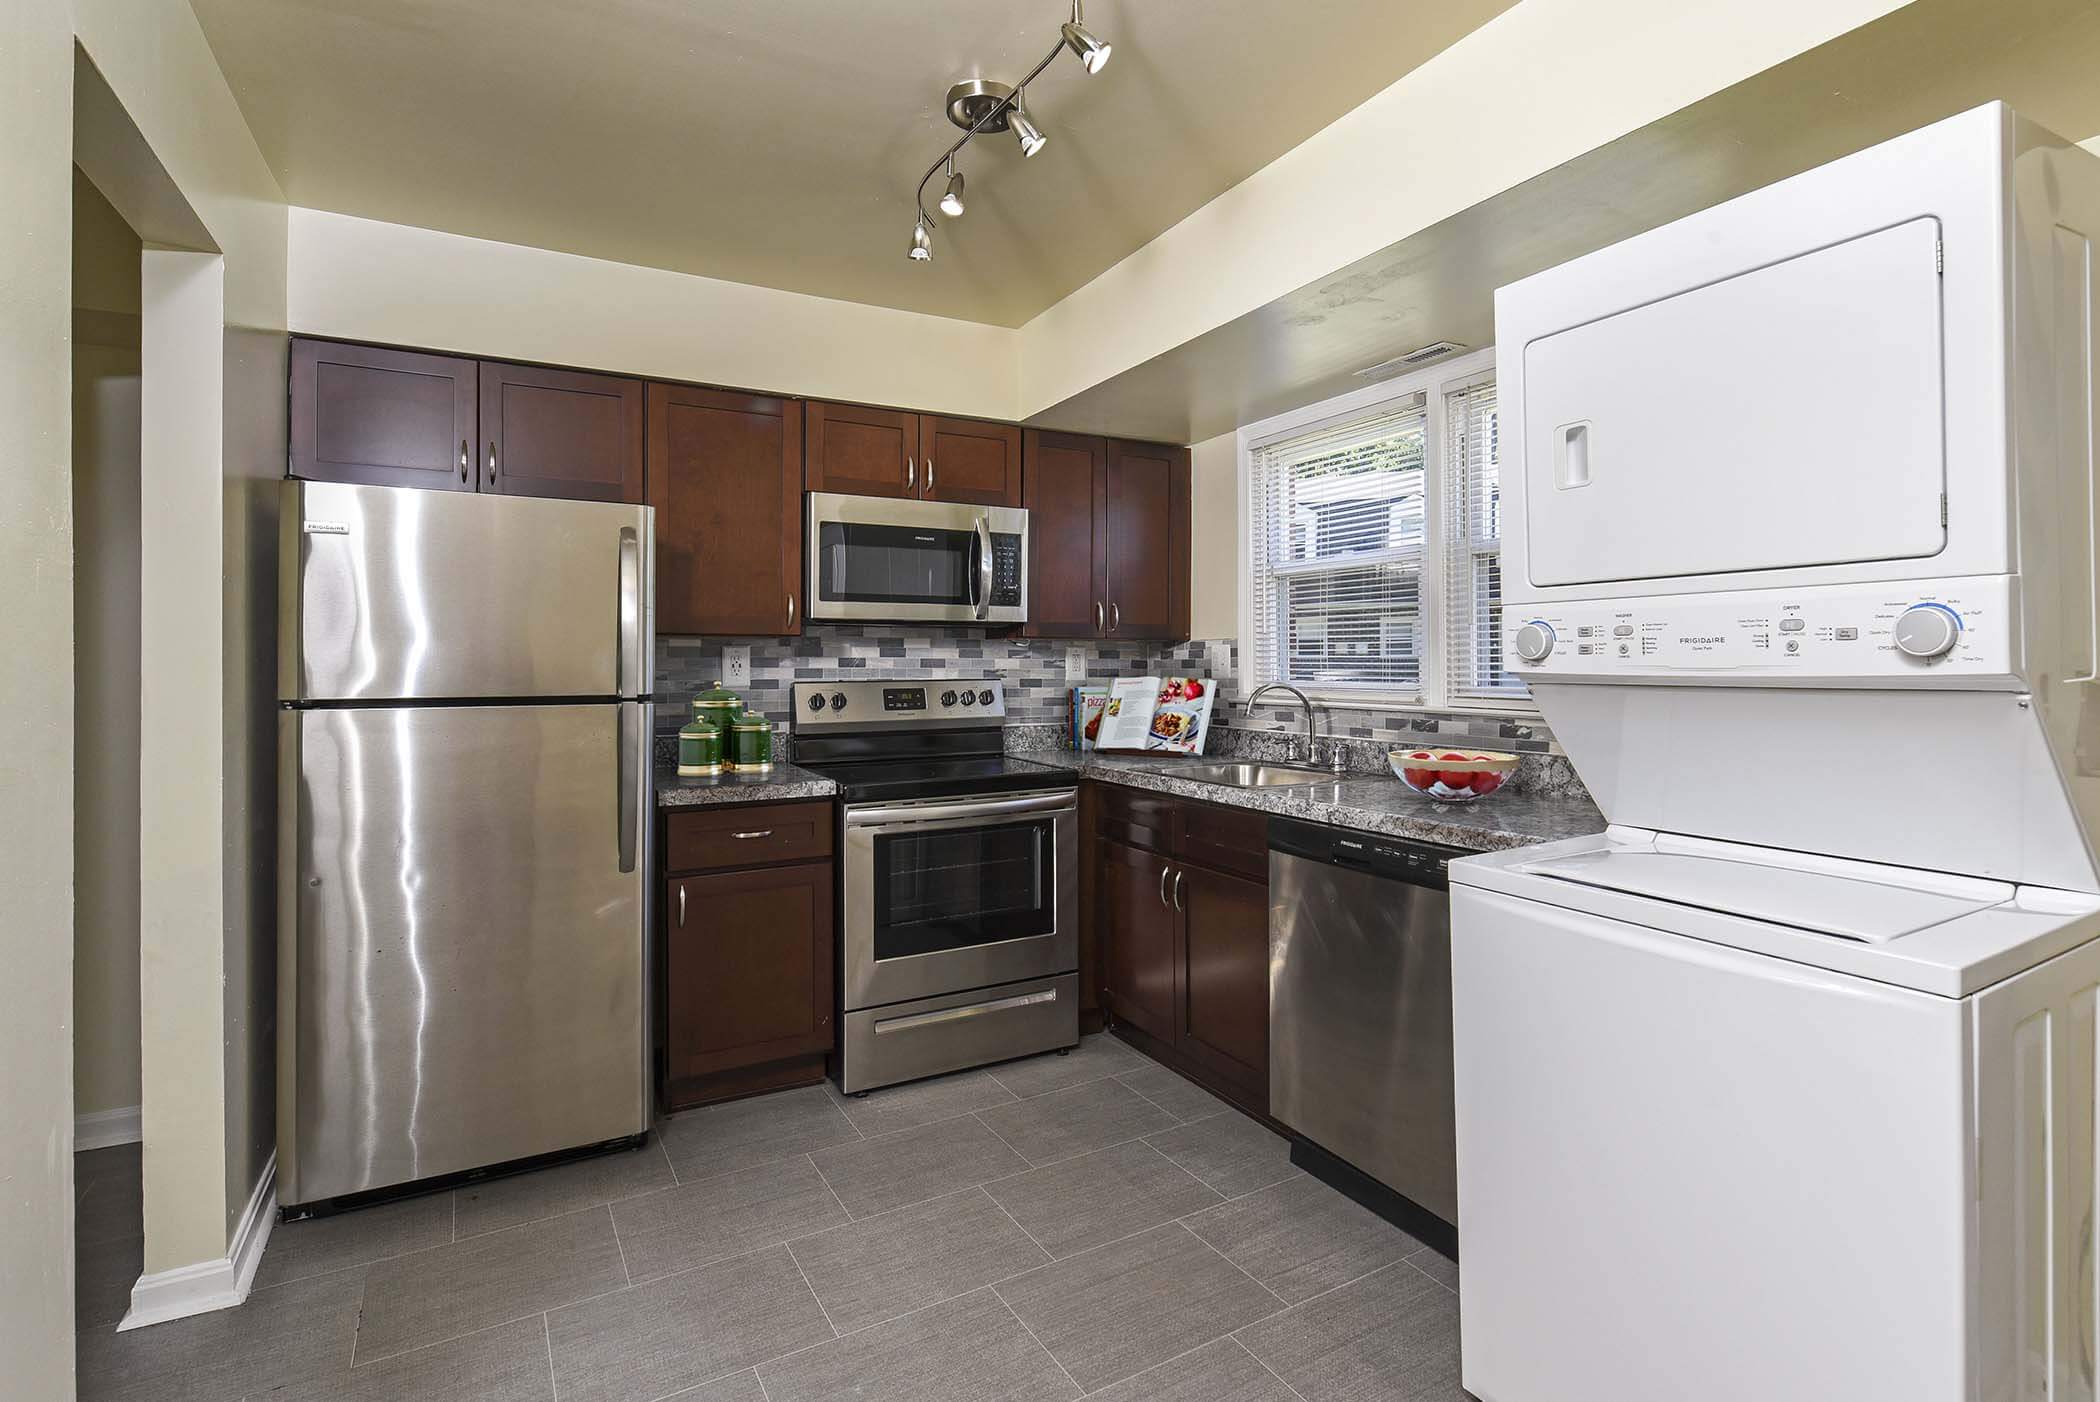 Model kitchen at Mariners Pointe in Joppa, Maryland